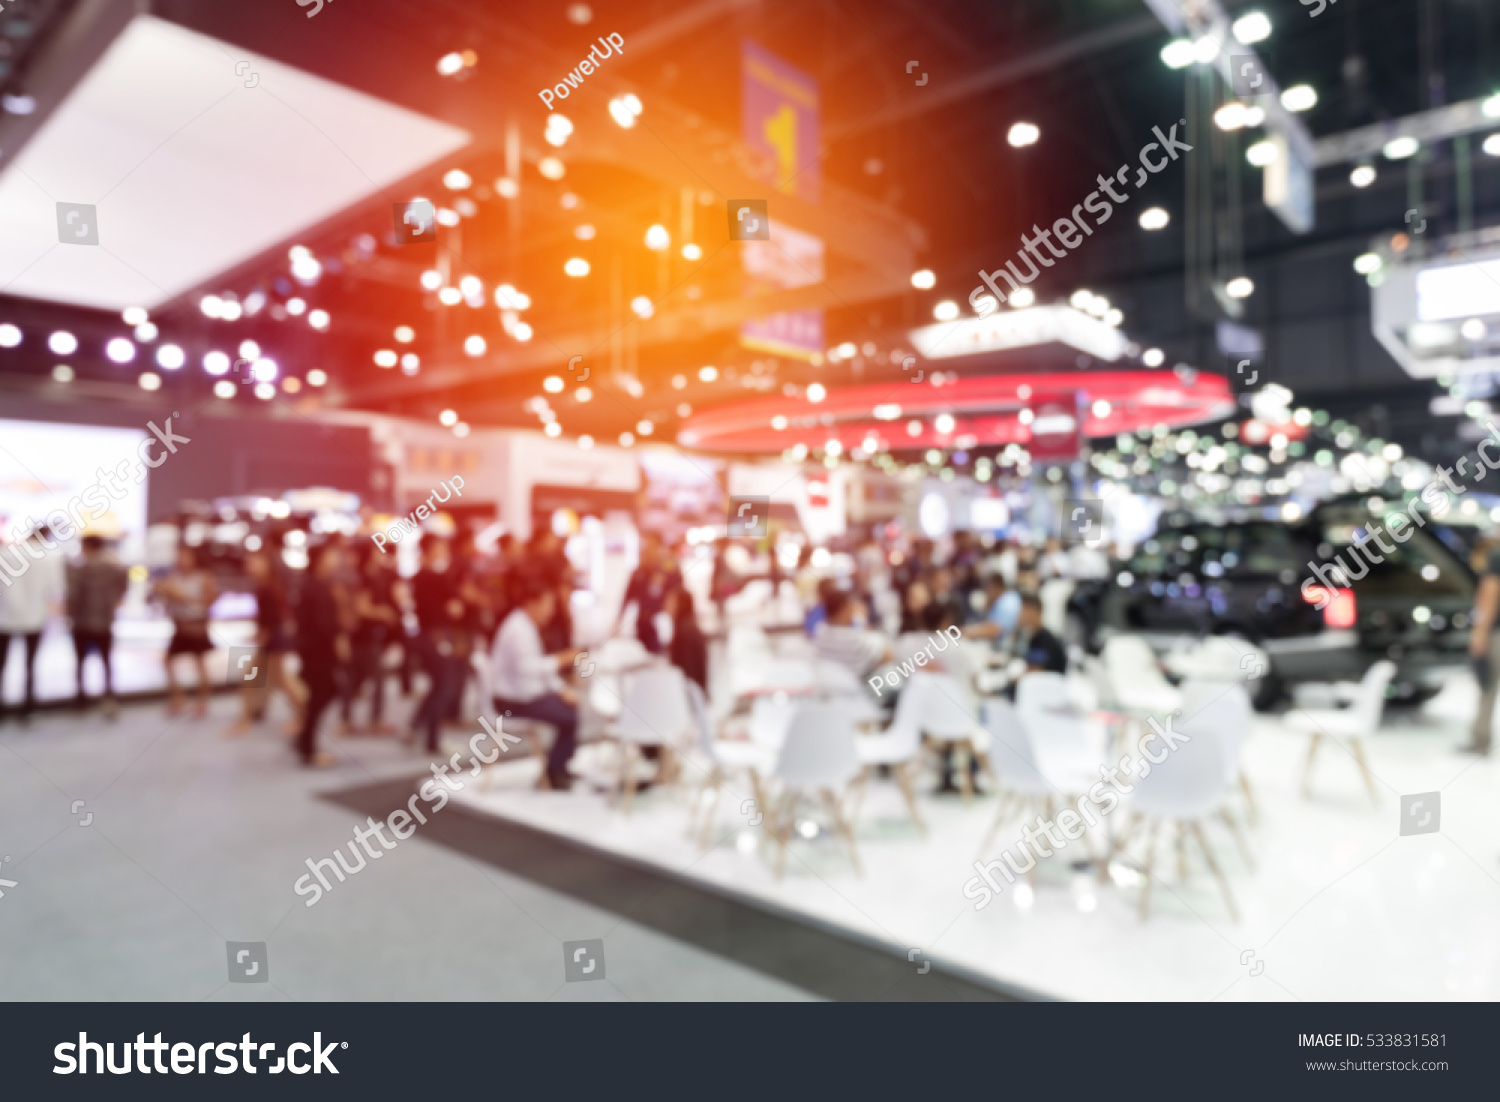 abstract blurred event with people for background #533831581